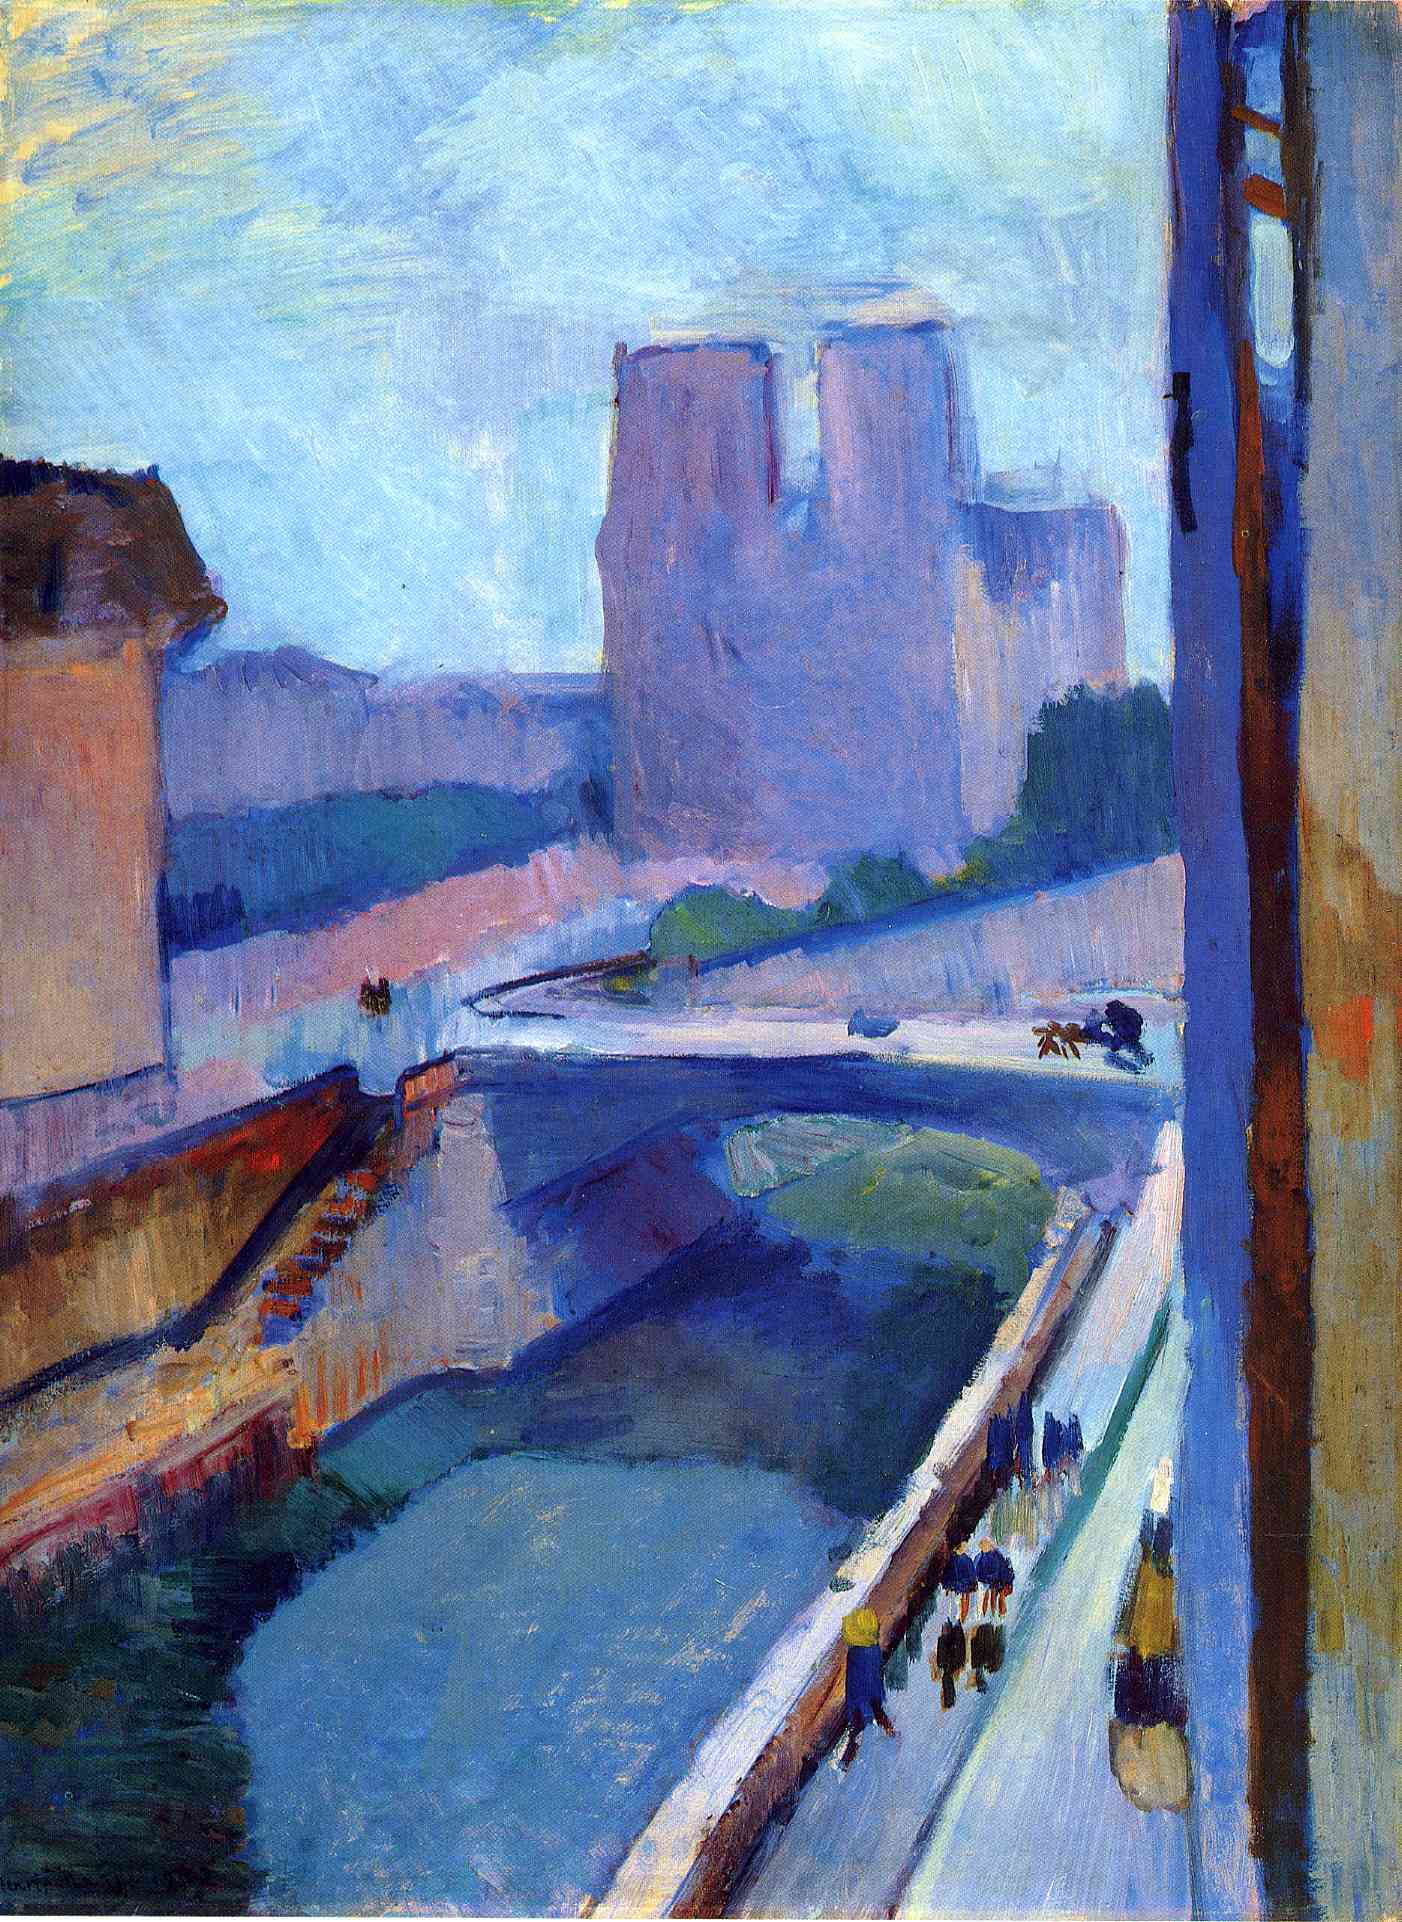 A Glimpse of Notre-Dame in the Late Afternoon by Henri Matisse - 1902 -  72 x 54 cm Albright-Knox Art Gallery